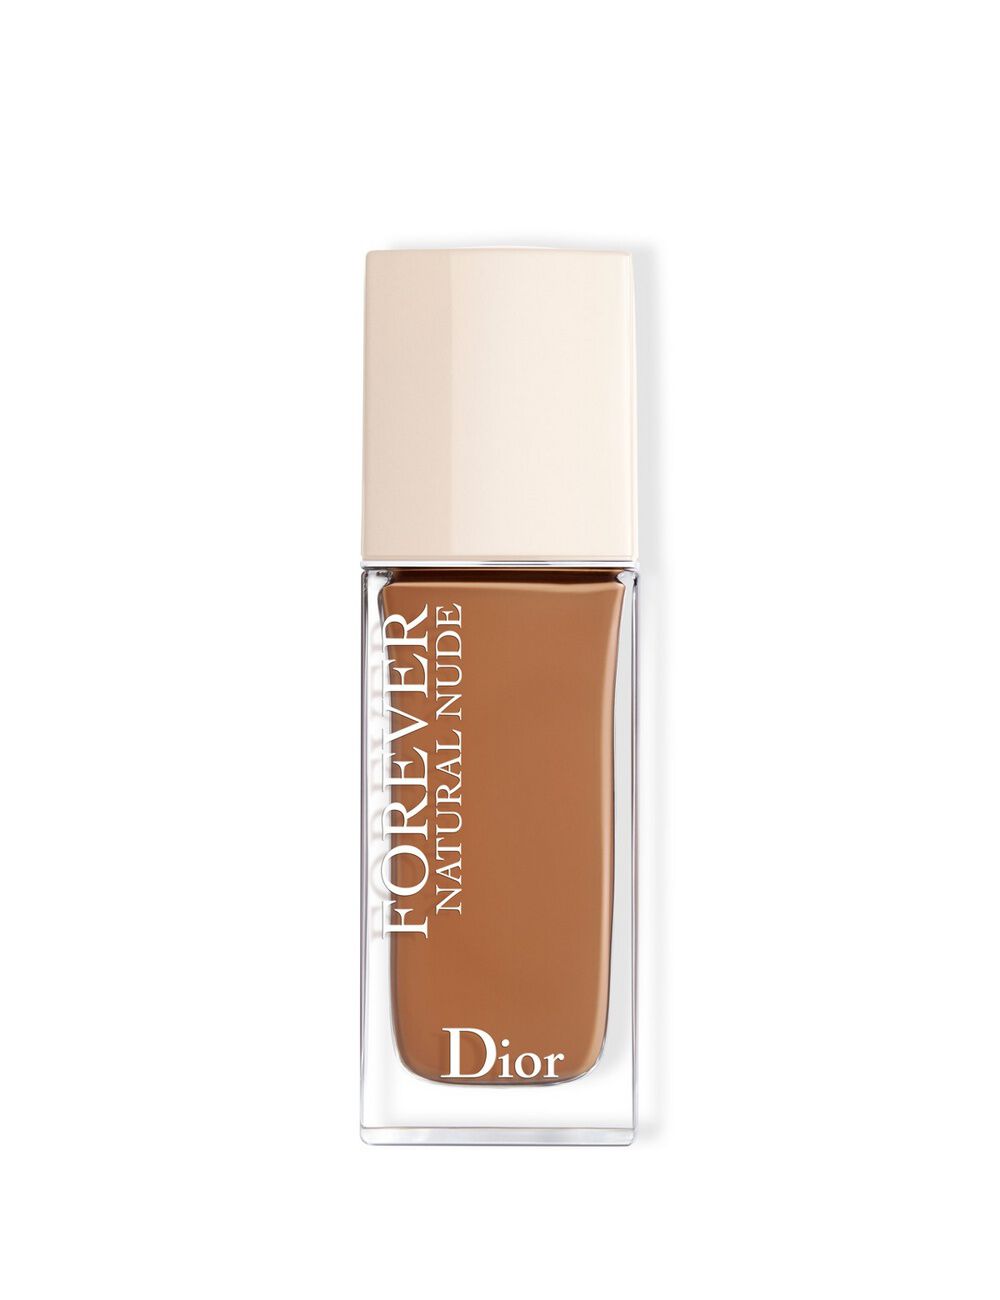 All Dior Close Clear all Filters Filter by Sub-category Eyes (2) Face 